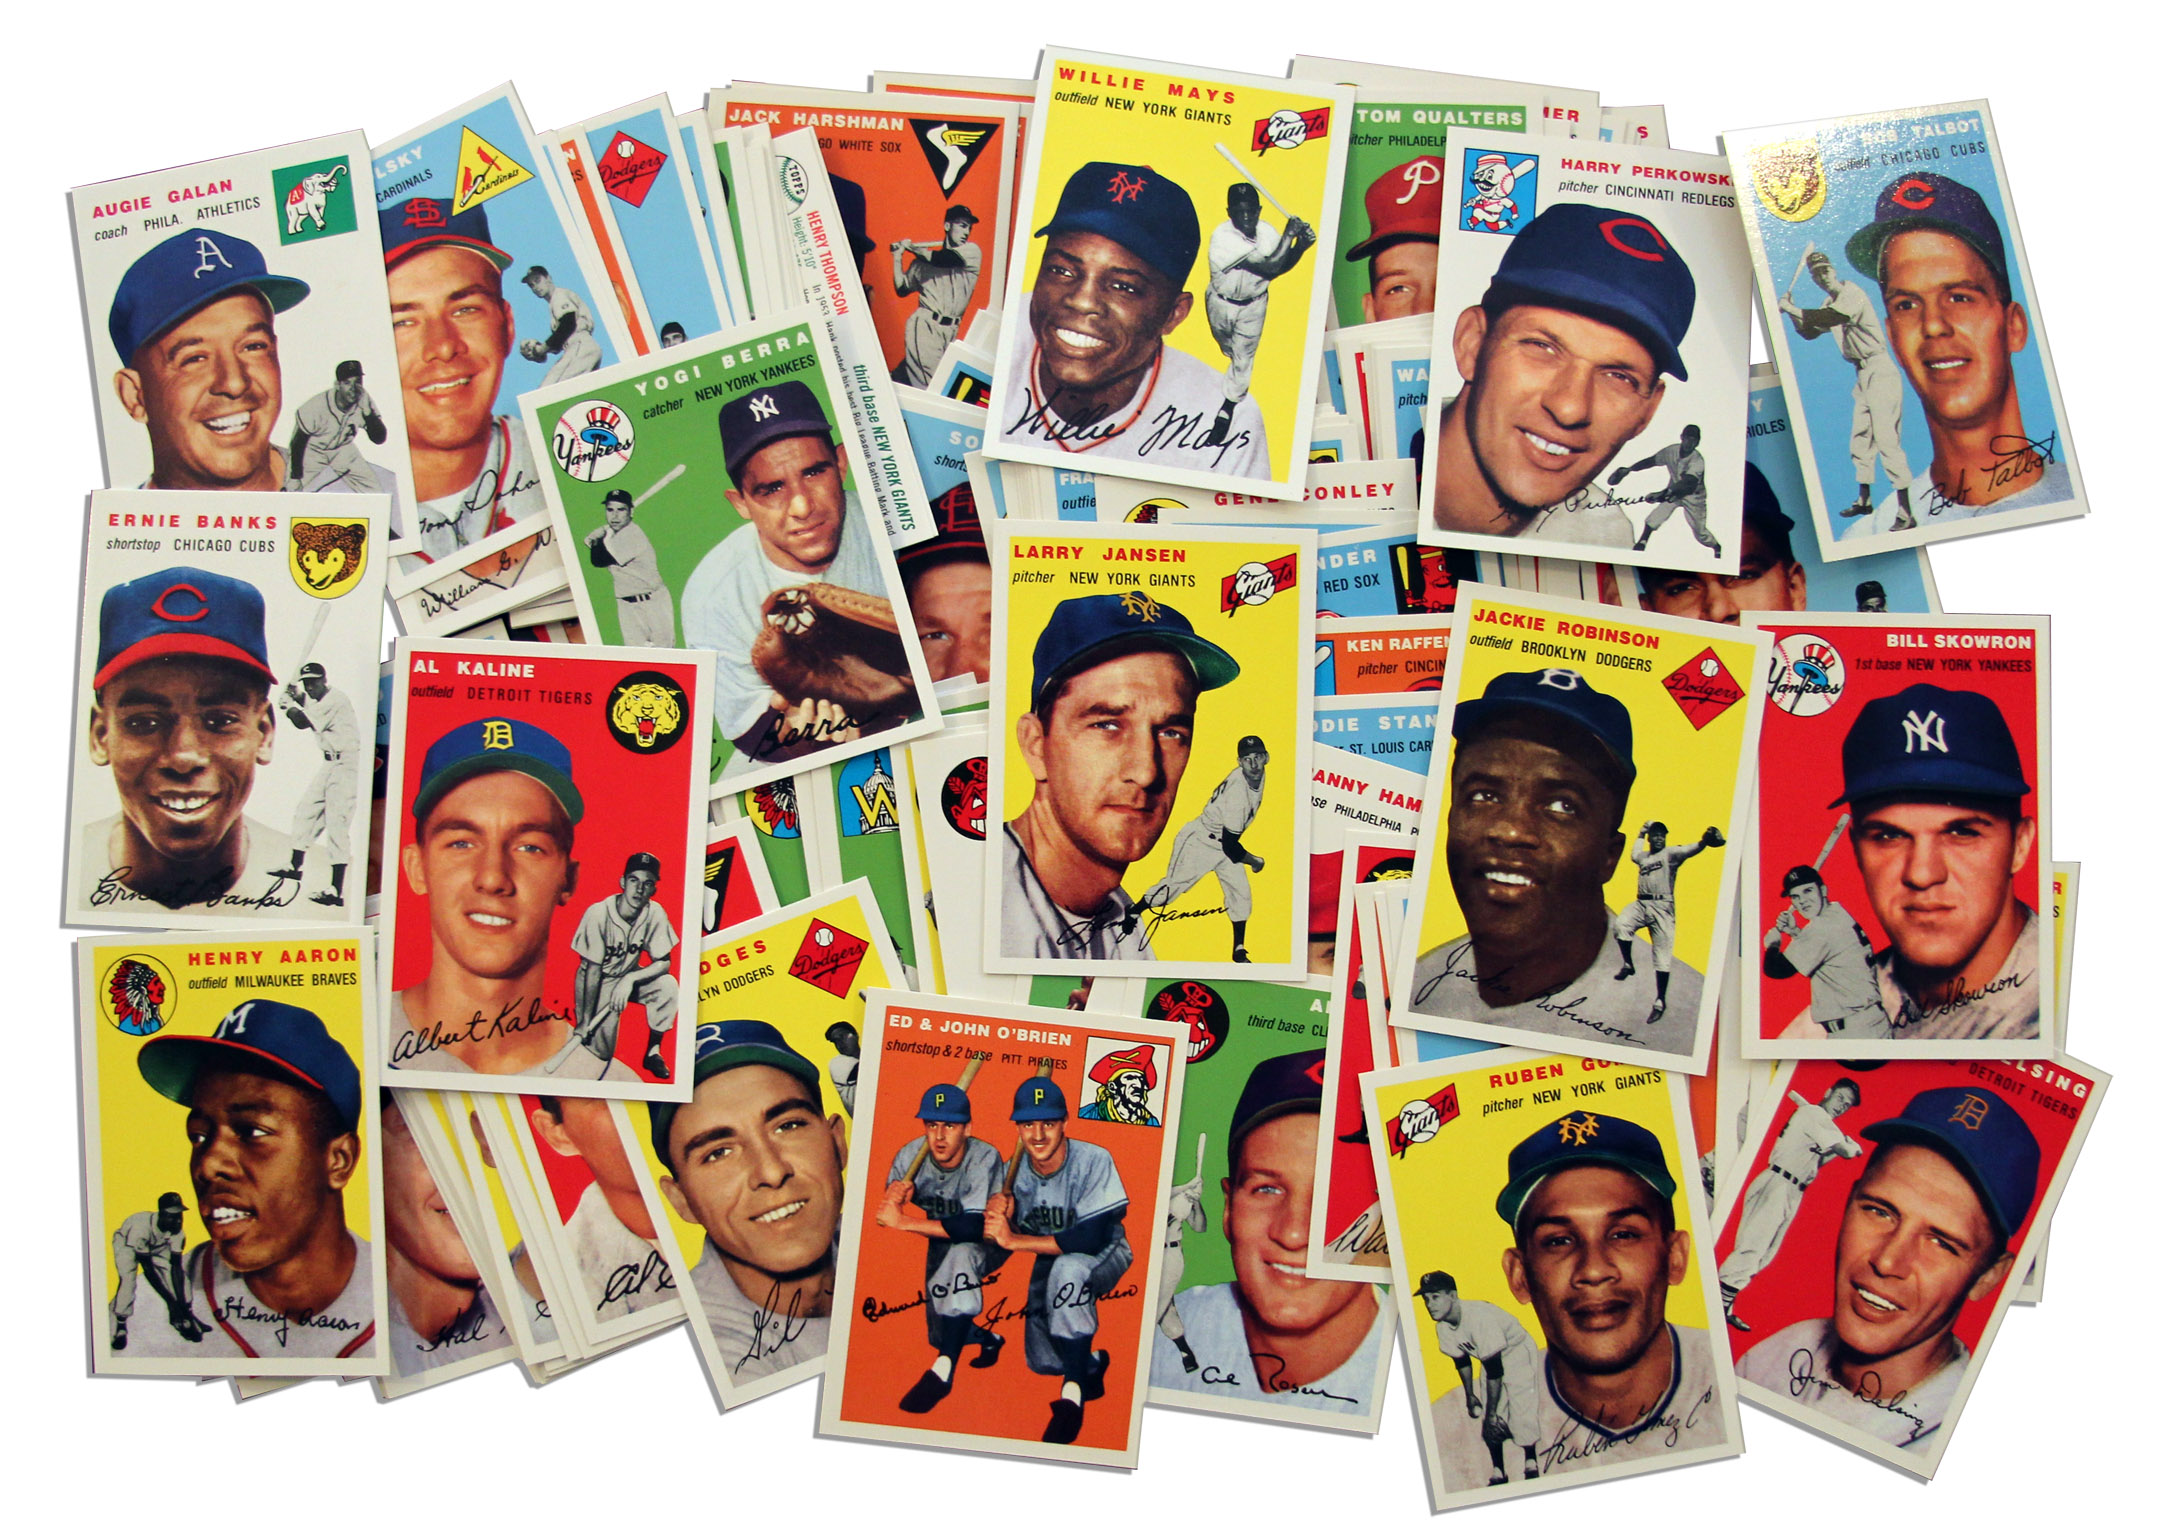 lot-detail-complete-reprint-set-of-topps-1954-baseball-cards-from